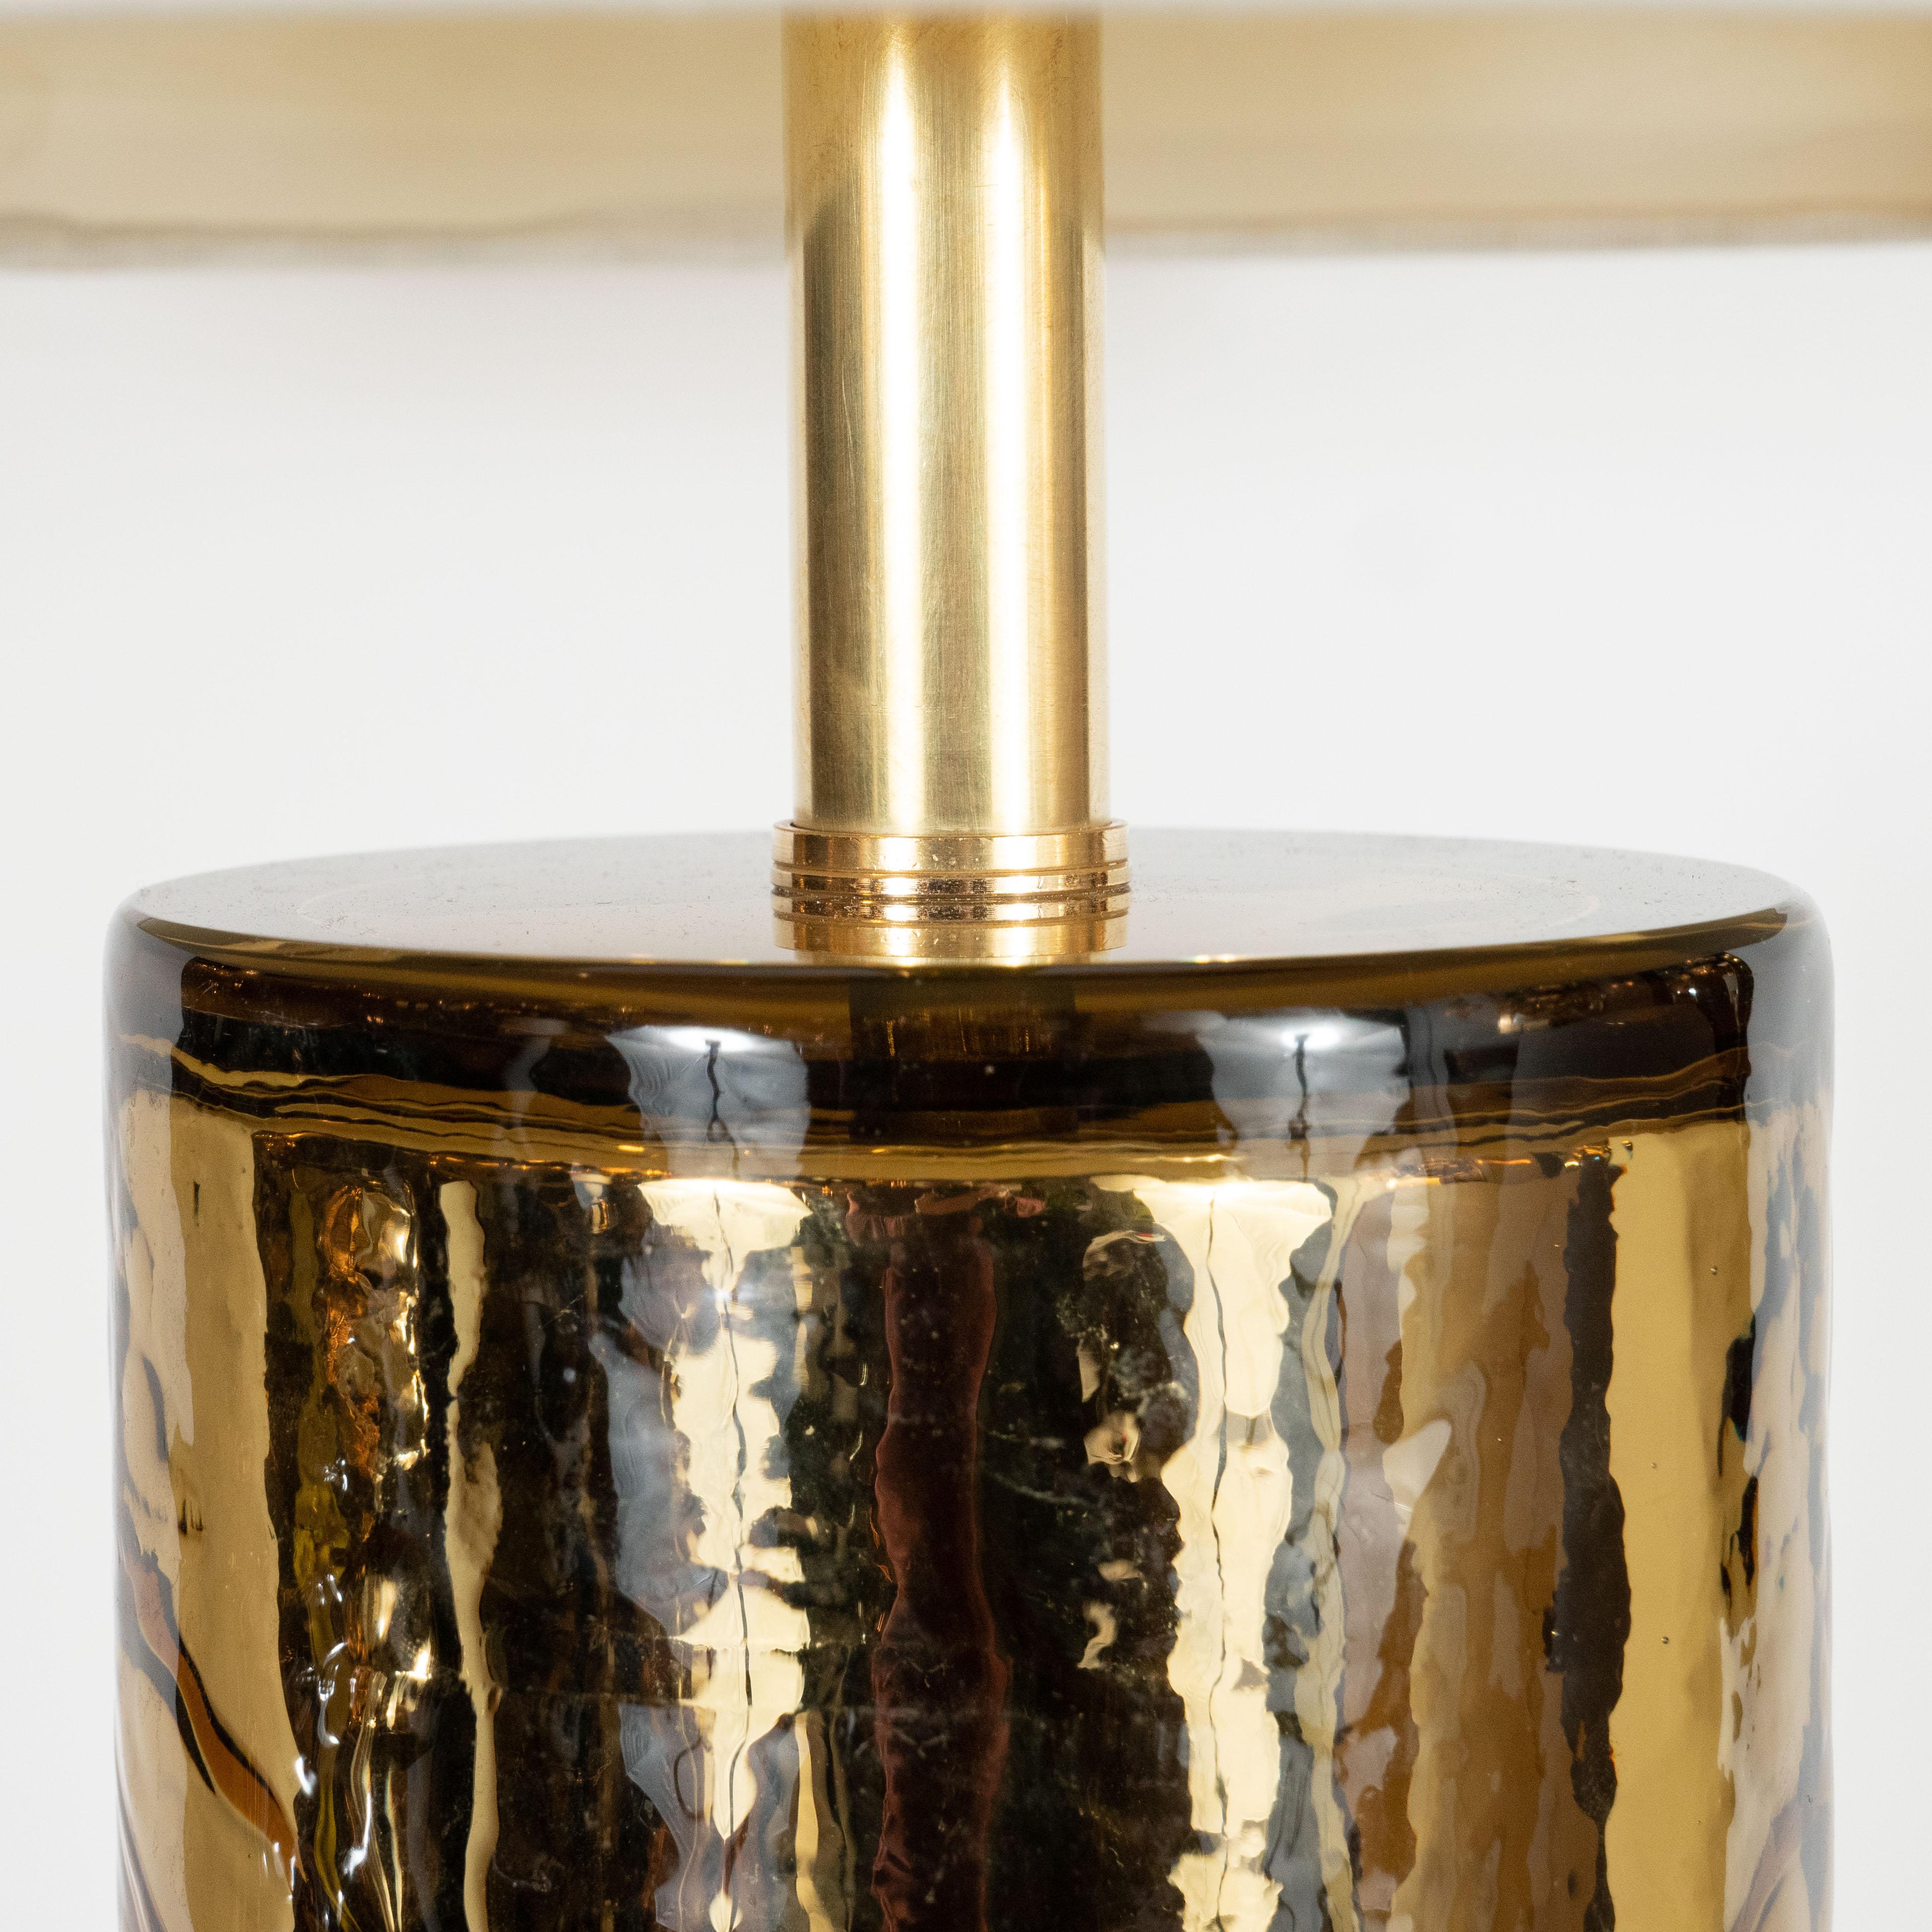 Pair of Sculptural Modernist Handblown Murano Gold Mercury Glass Table Lamps In Excellent Condition For Sale In New York, NY